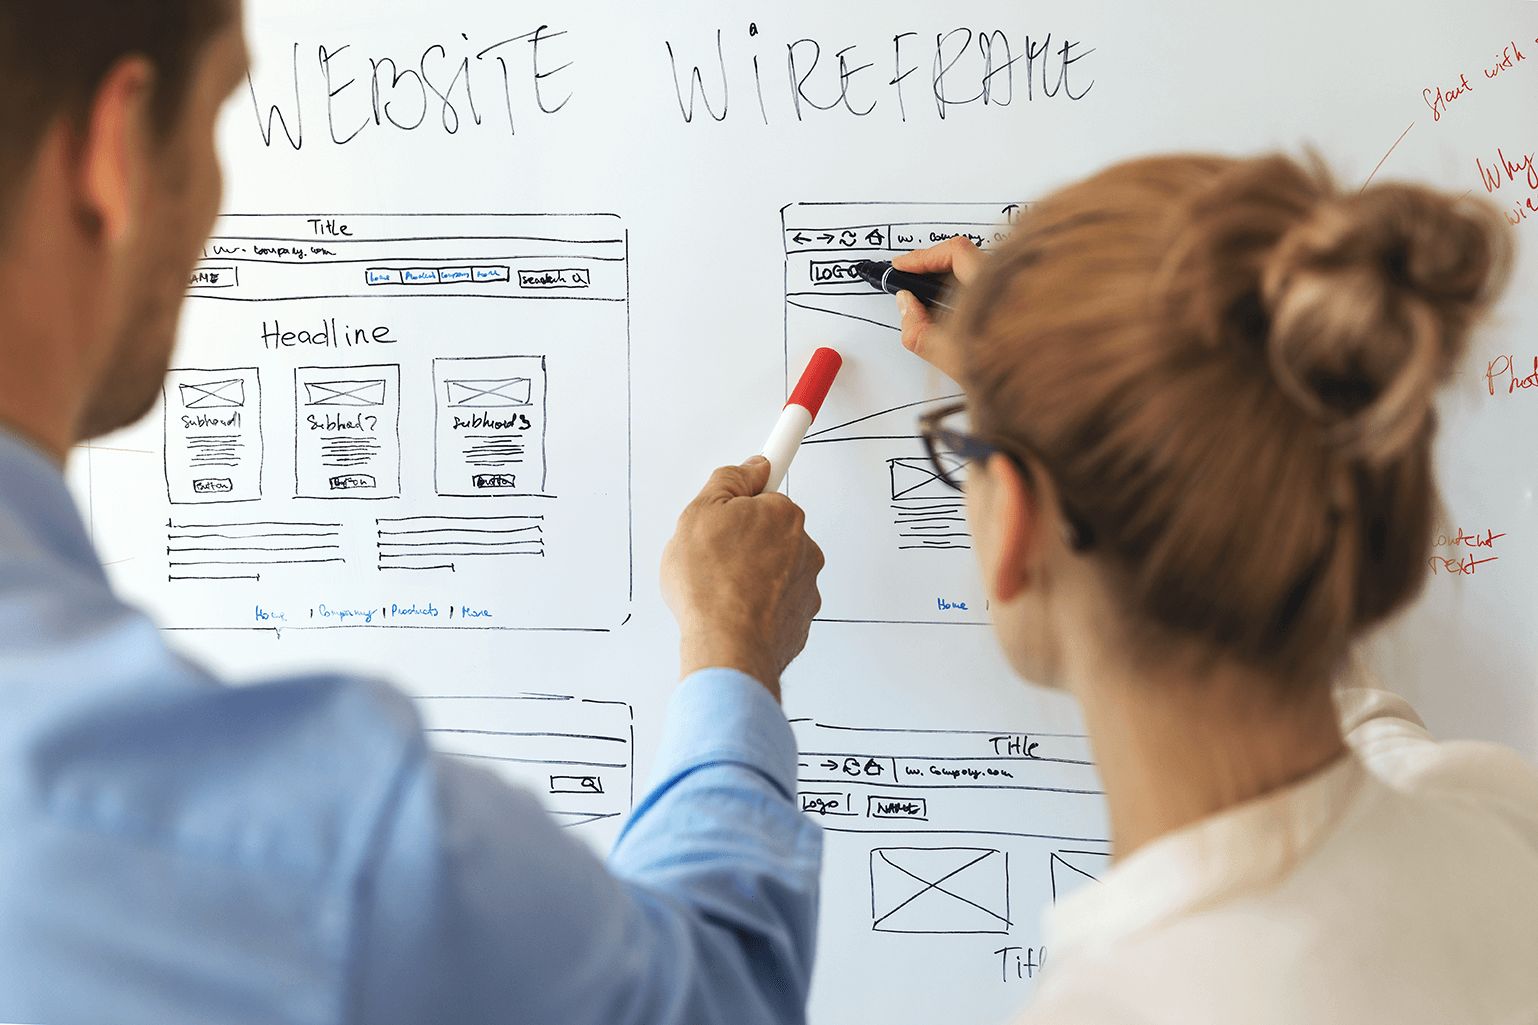 A User Experience (UX) designer and User Interface (UI) designer mapping out a website on a white board.